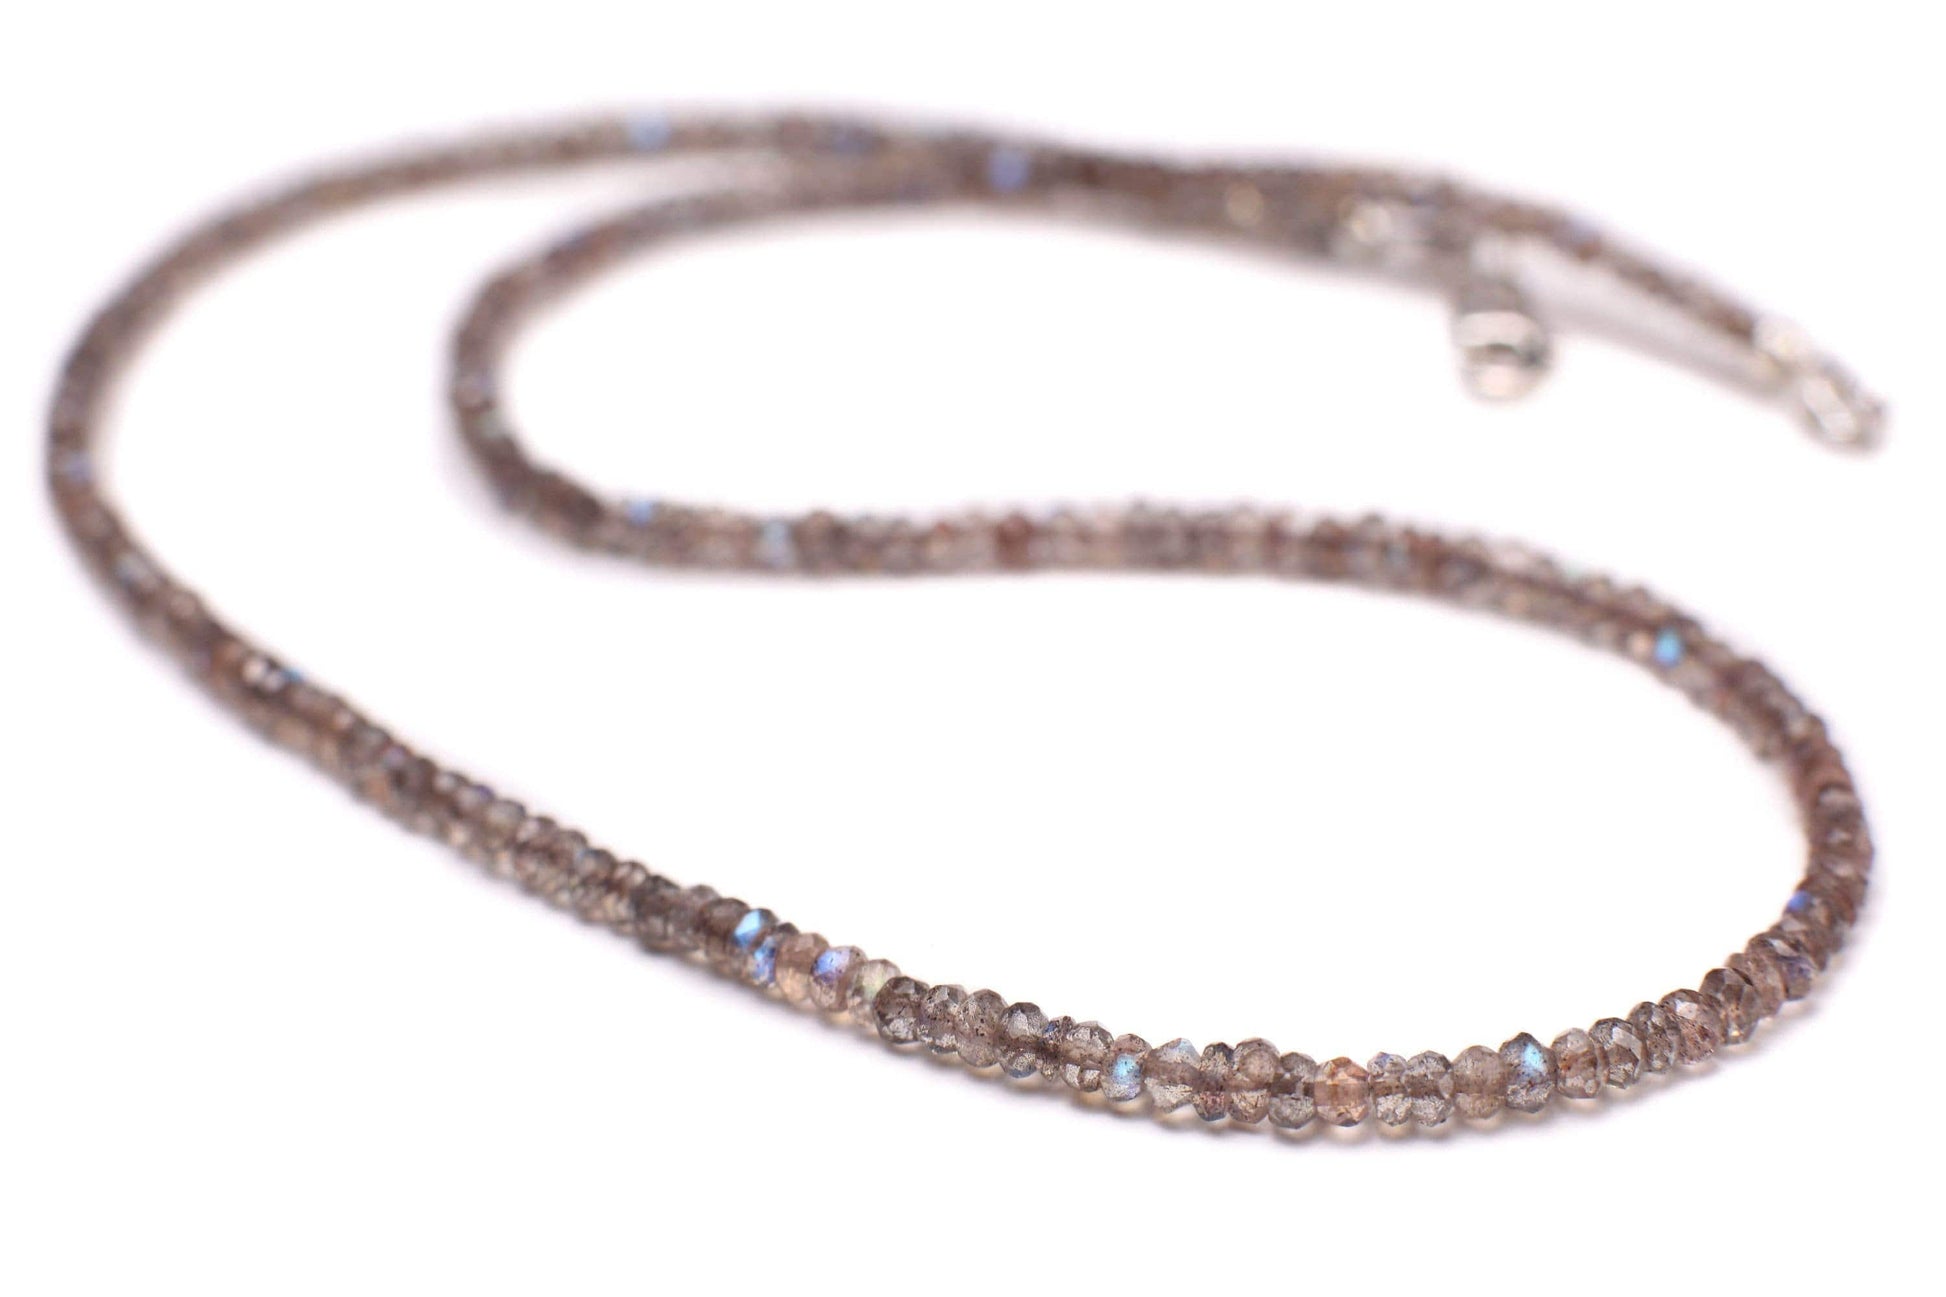 Labradorite Blue Flash Faceted 4mm Rondelle Choker Layering Necklace in 925 Sterling Silver, Birthday, Yoga ,Healing ,Woman Gift